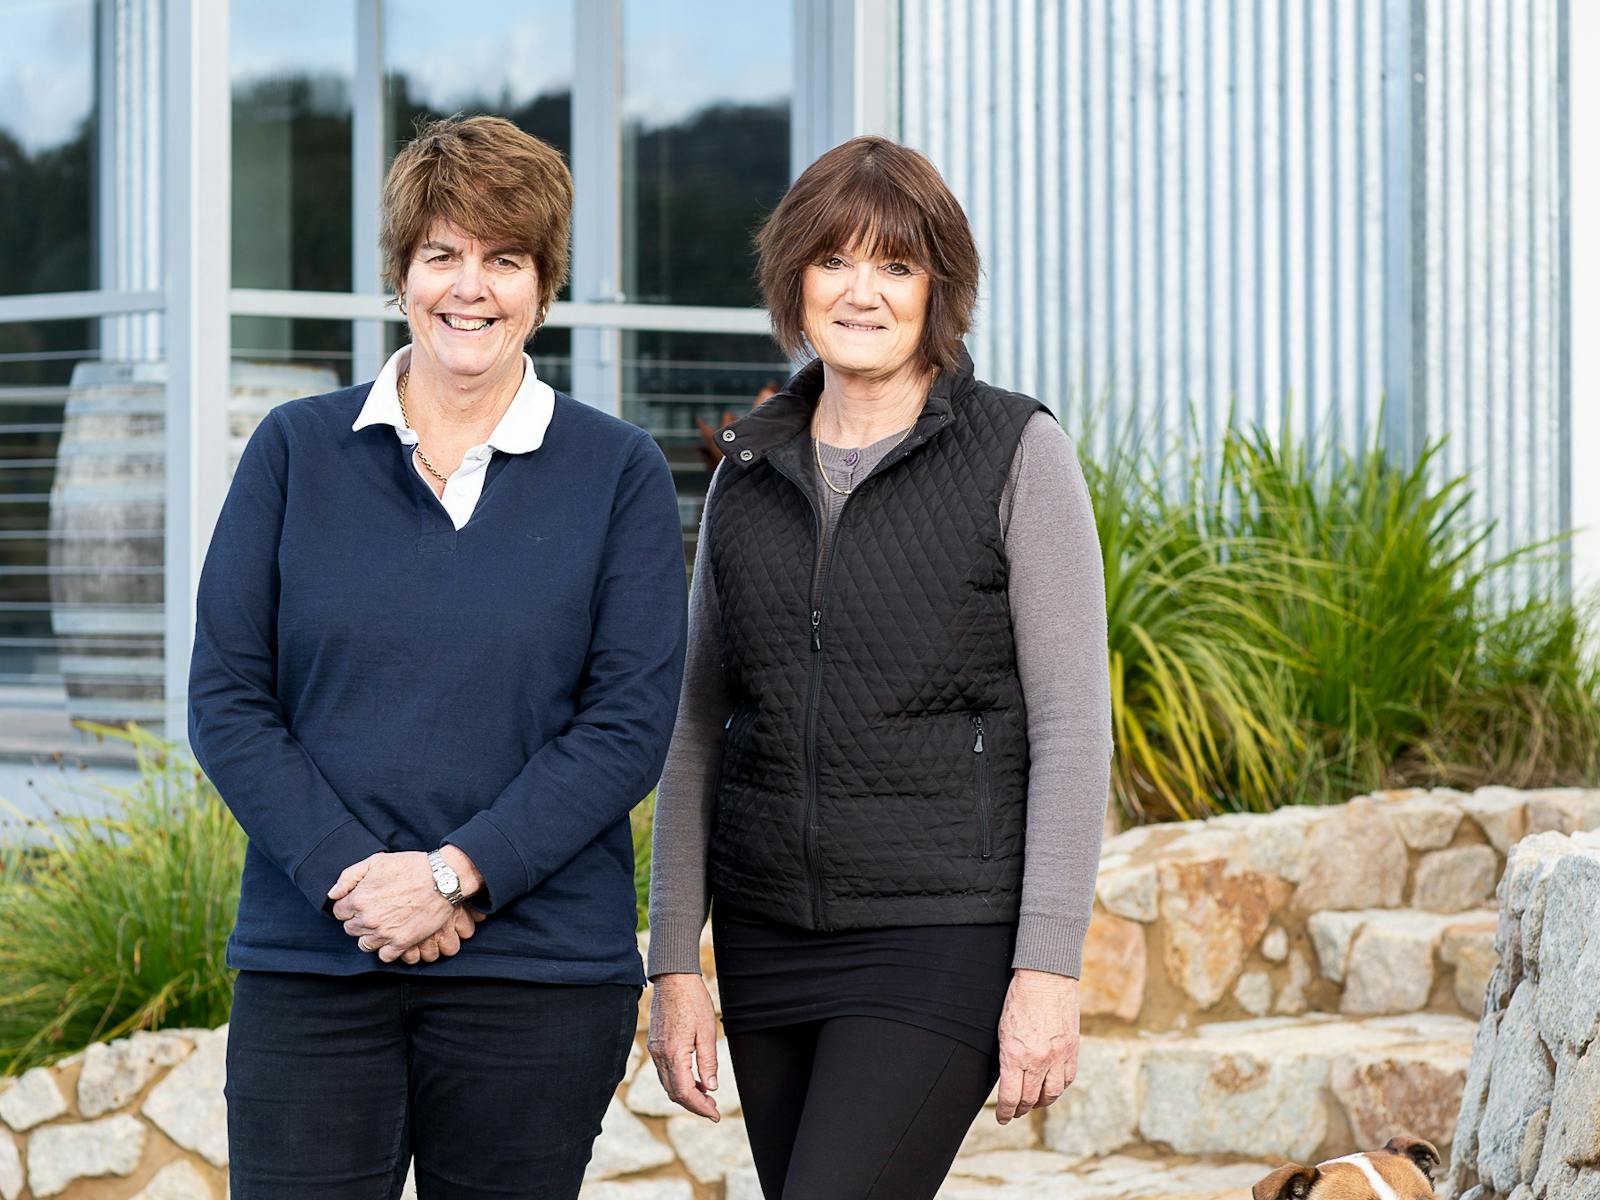 Meet the owners at Serengale -Serena and Gayle.